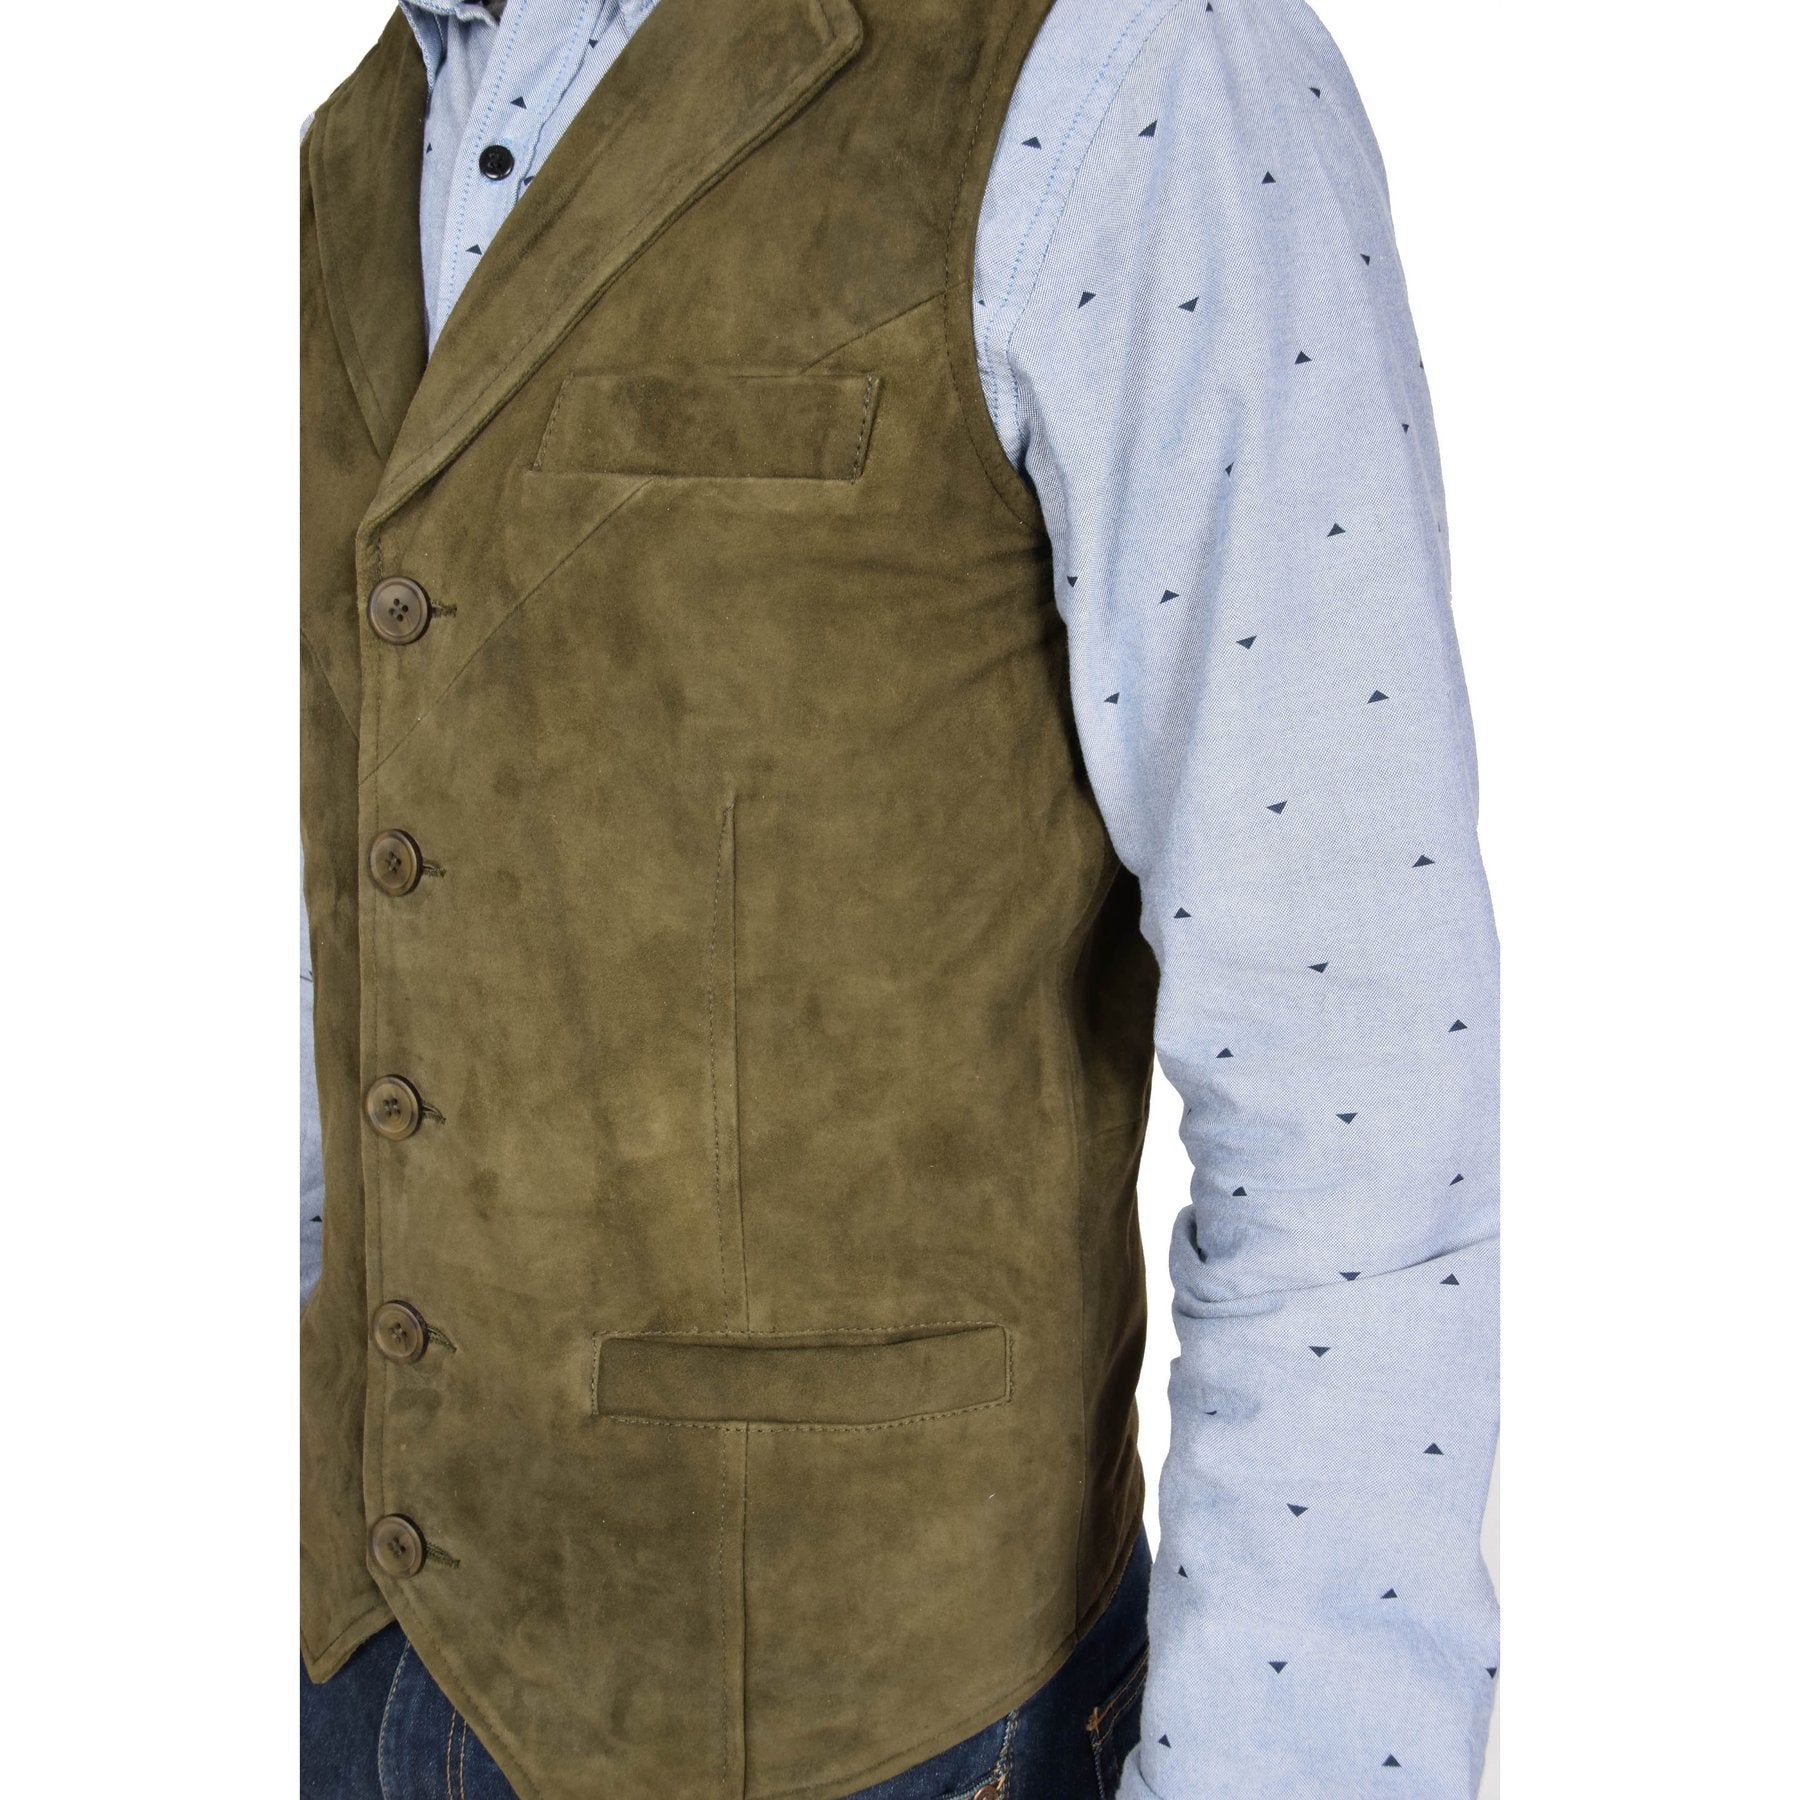 Spine Spark Men's Green Soft Suede Leather Classic Style Vest